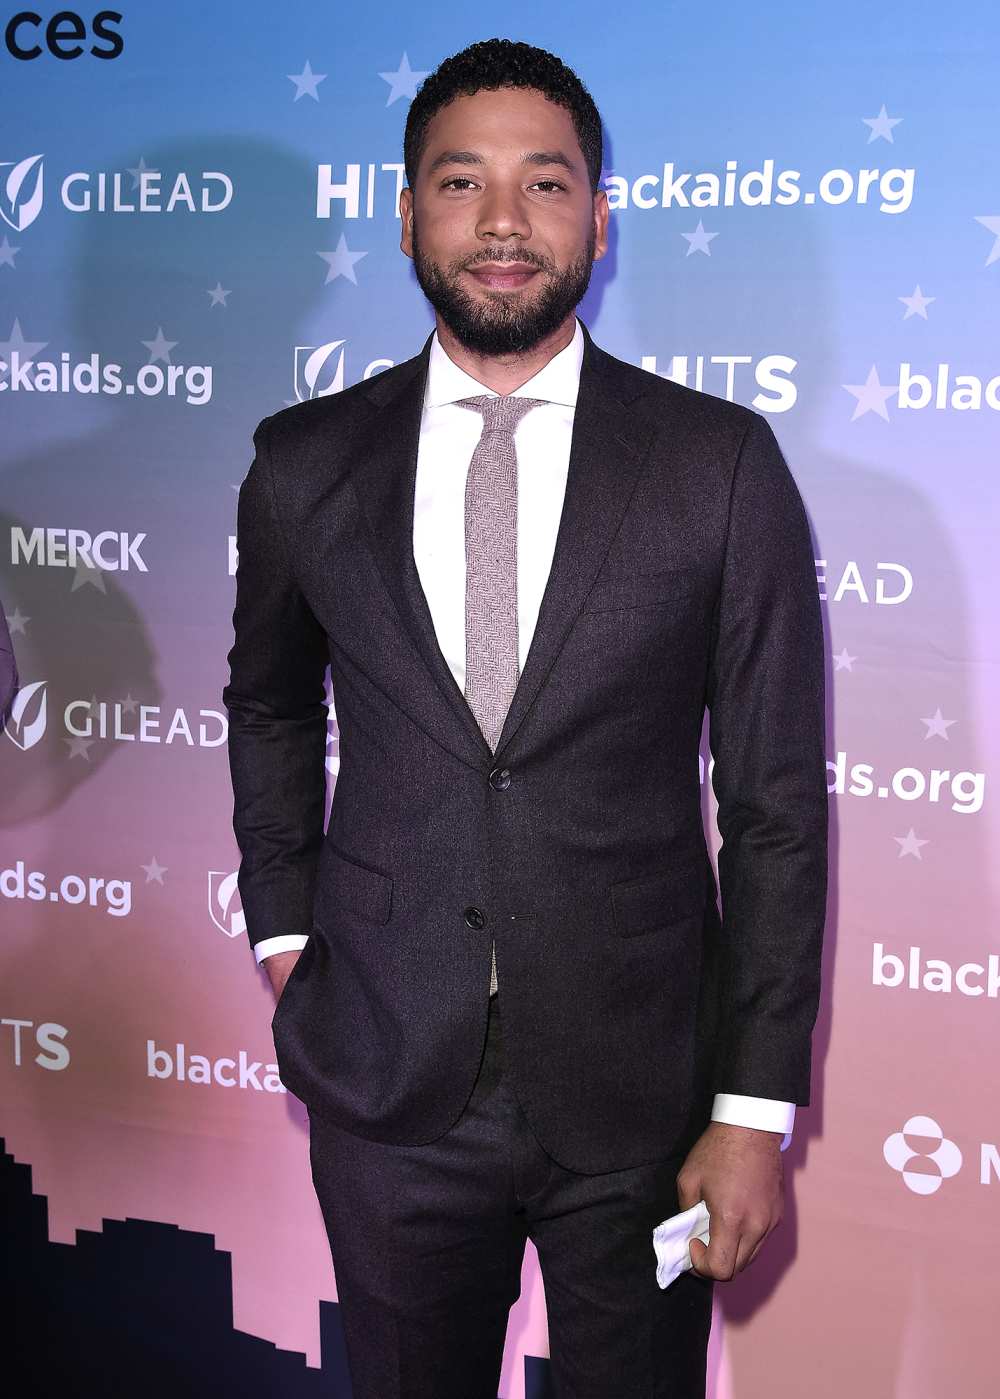 Jussie Smollett Makes 1st Red Carpet Appearance in Years After His Alleged Attack